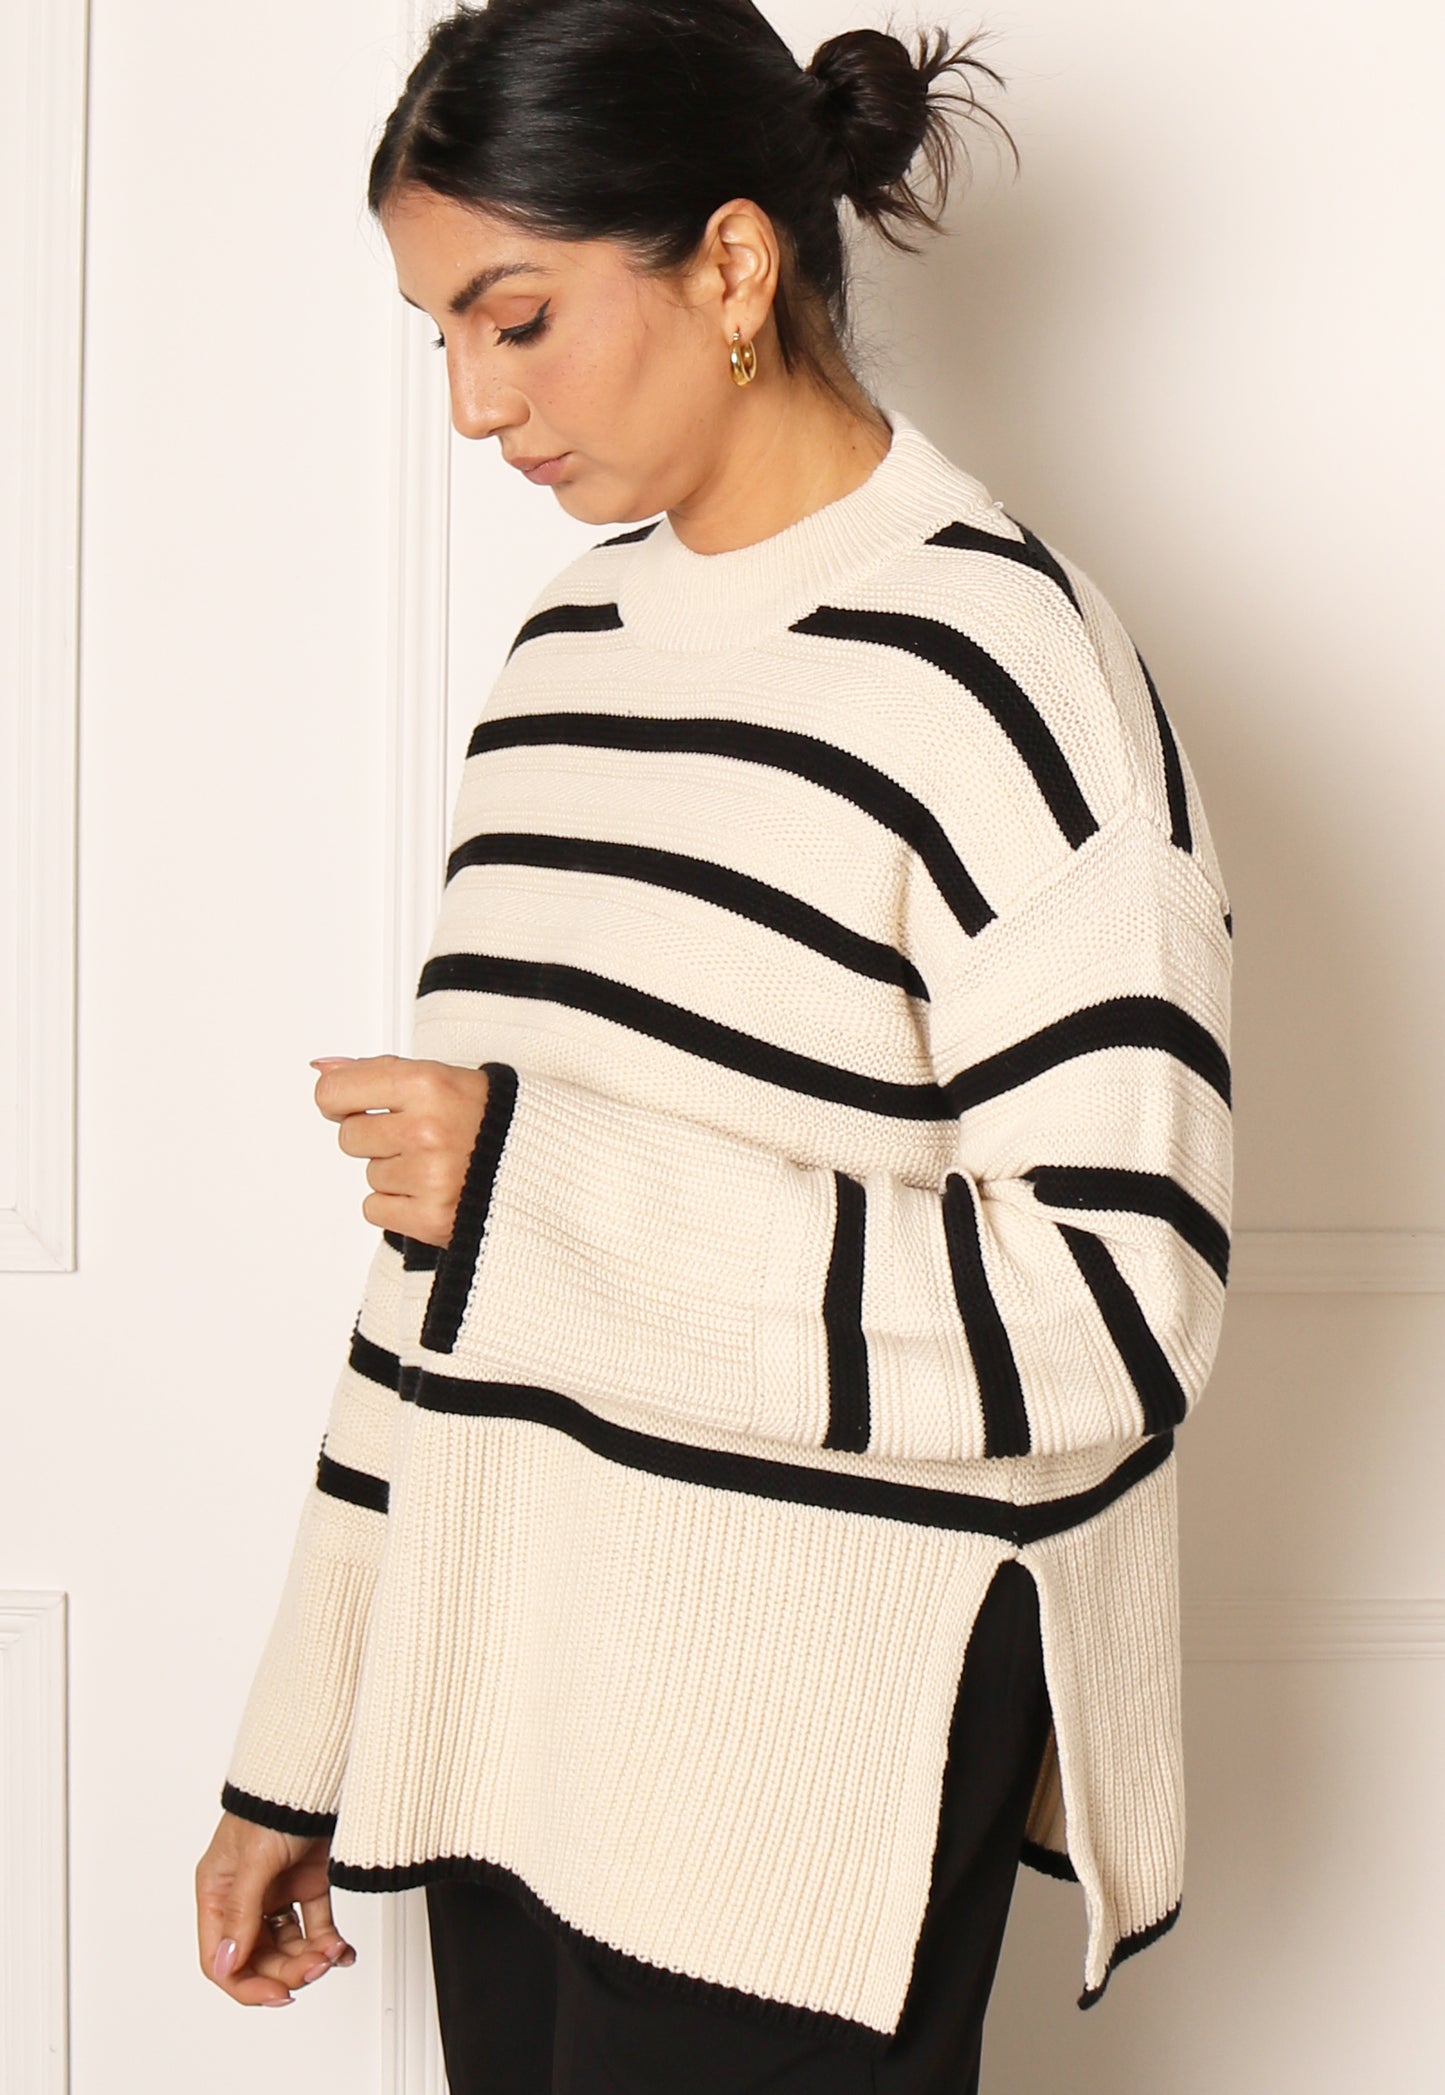 ONLY Sia Chunky Knit Stripe Jumper in Cream & Black | One Nation